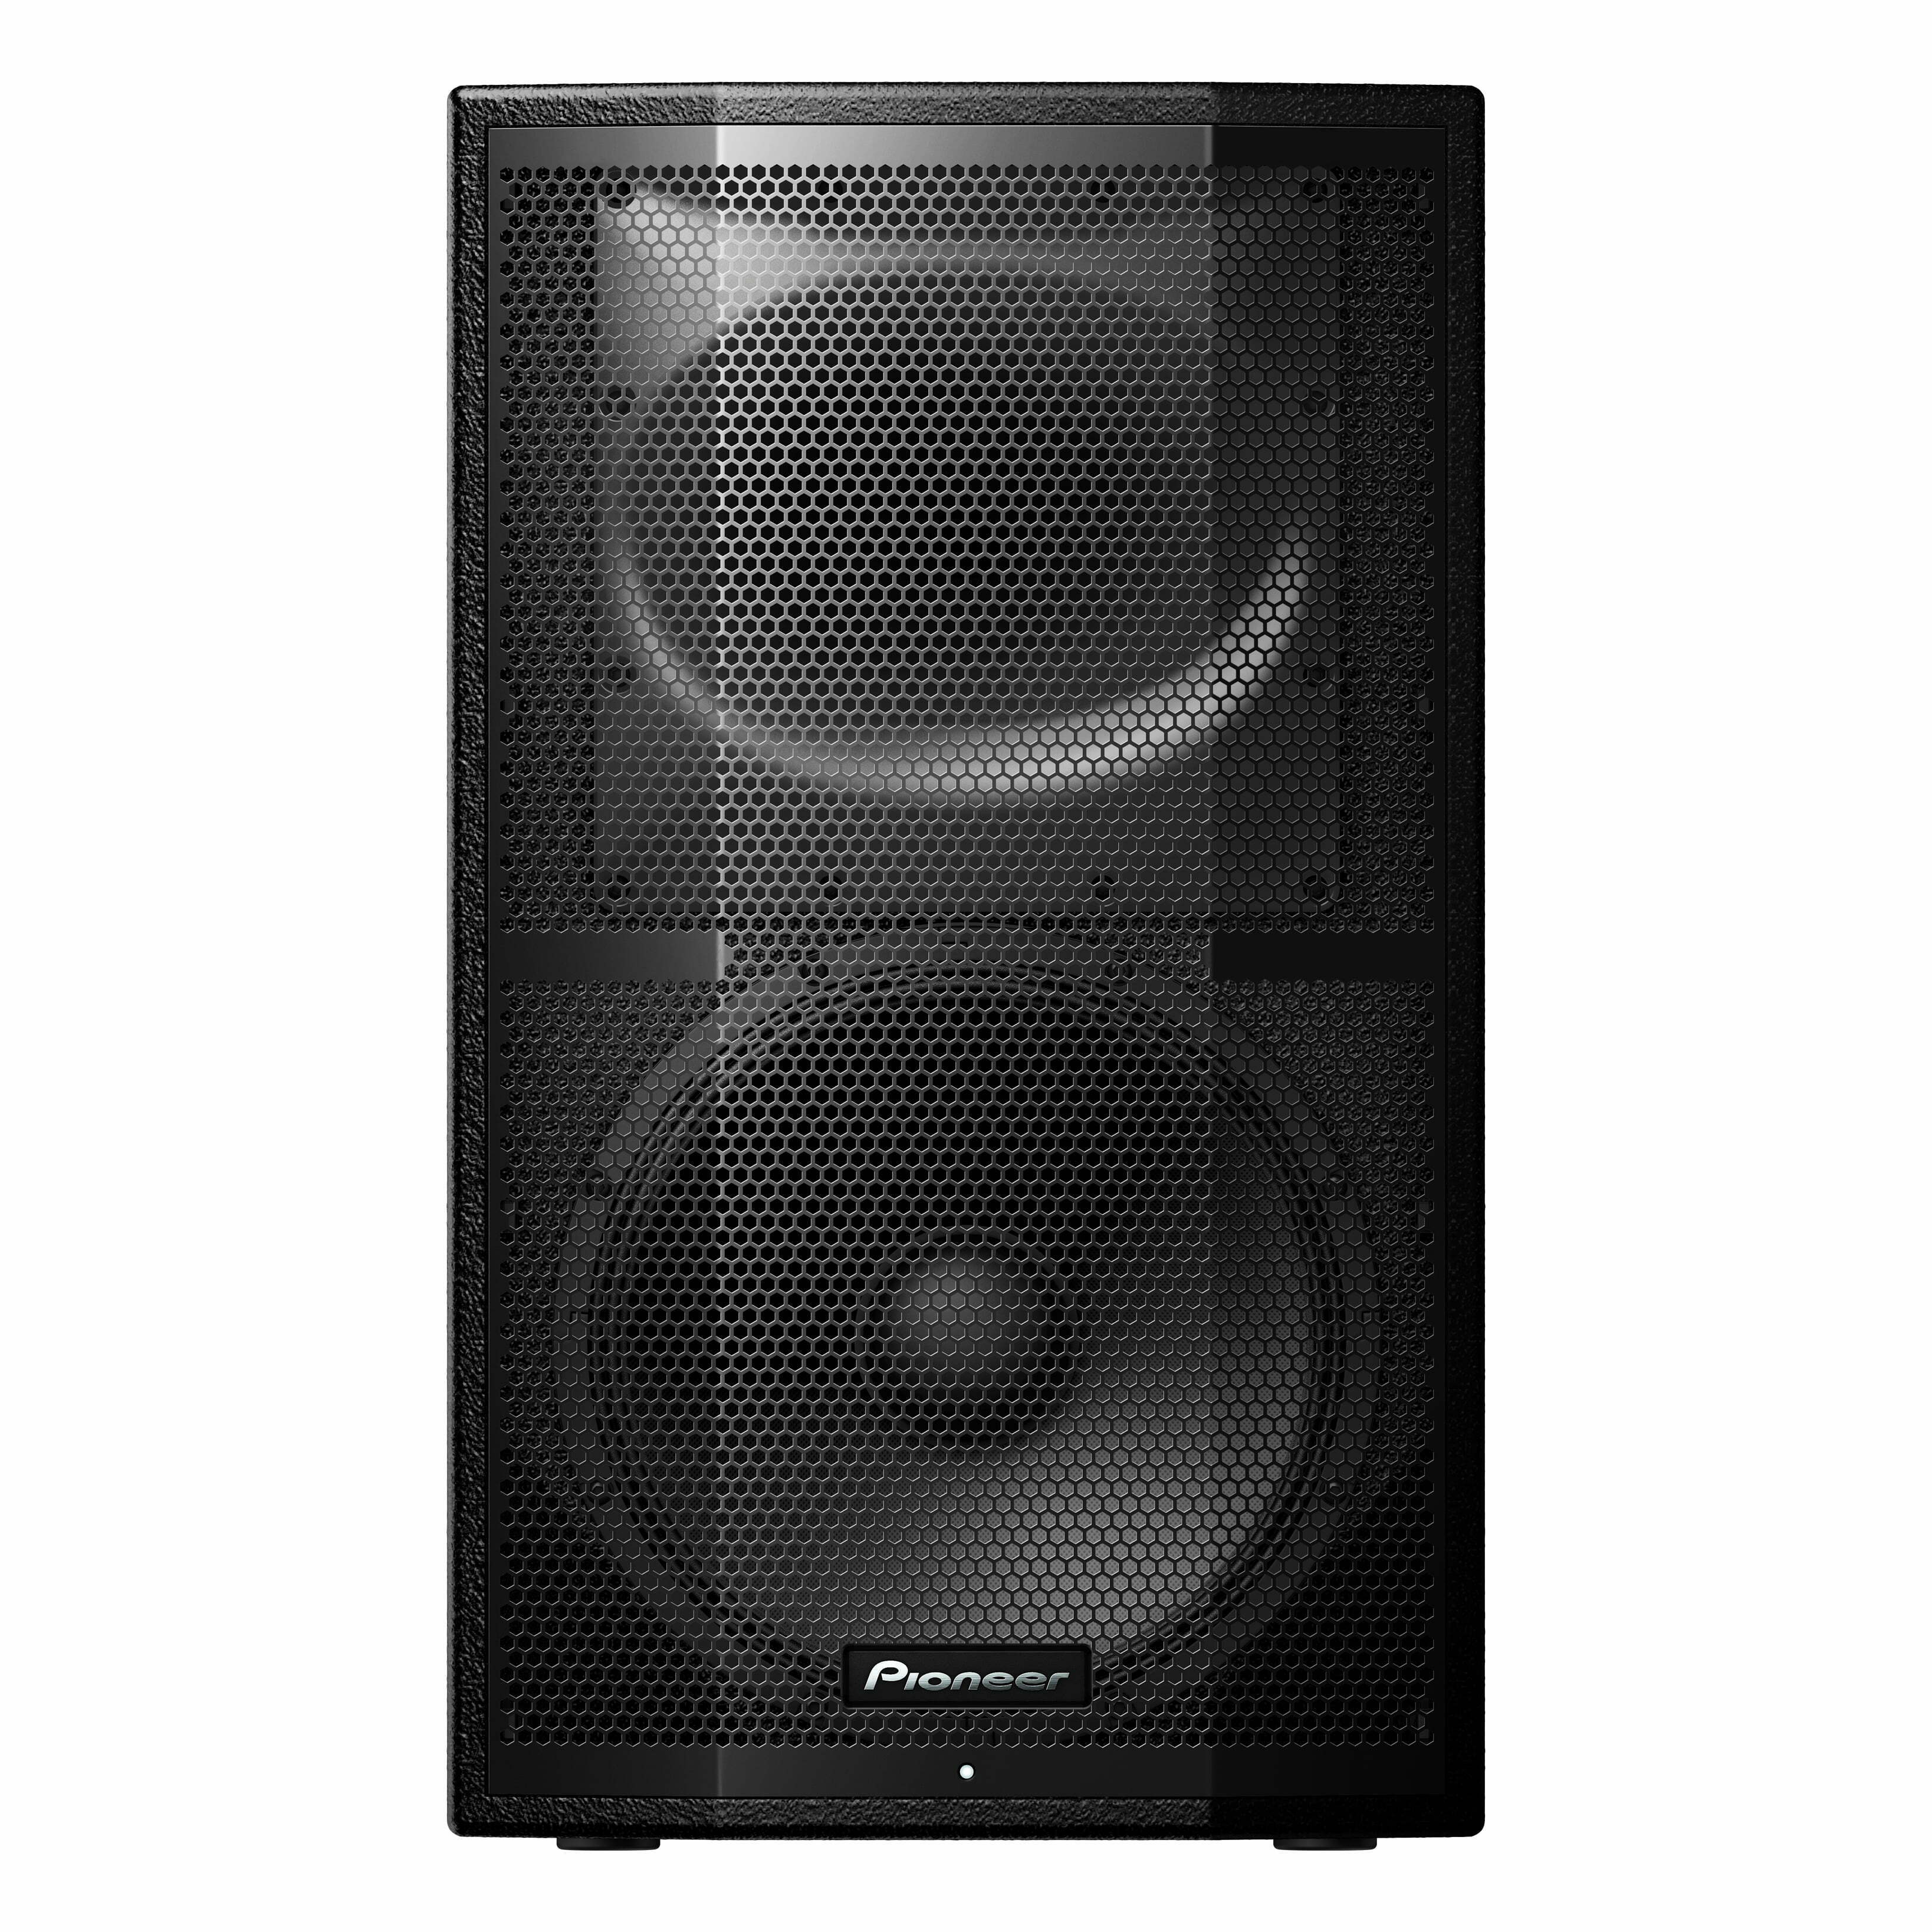 XPRS_speaker_12inch_front_high|XPRS_speaker_12inch_wedge_high|XPRS_speaker_12inch_rear_high|XPRS_speaker_12inch_angle_high|XPRS_speaker_pr_dual-angle_B_low|XPRS_speaker_pr_dual-angle_A_low|XPRS_speaker_horn_A_front_low|XPRS_speaker_12inch_side_high|XPRS_speaker_12inch_angle_high_blk|XPRS_speaker_12inch_front_high_blk|XPRS_TOP_IMAGE - Copy